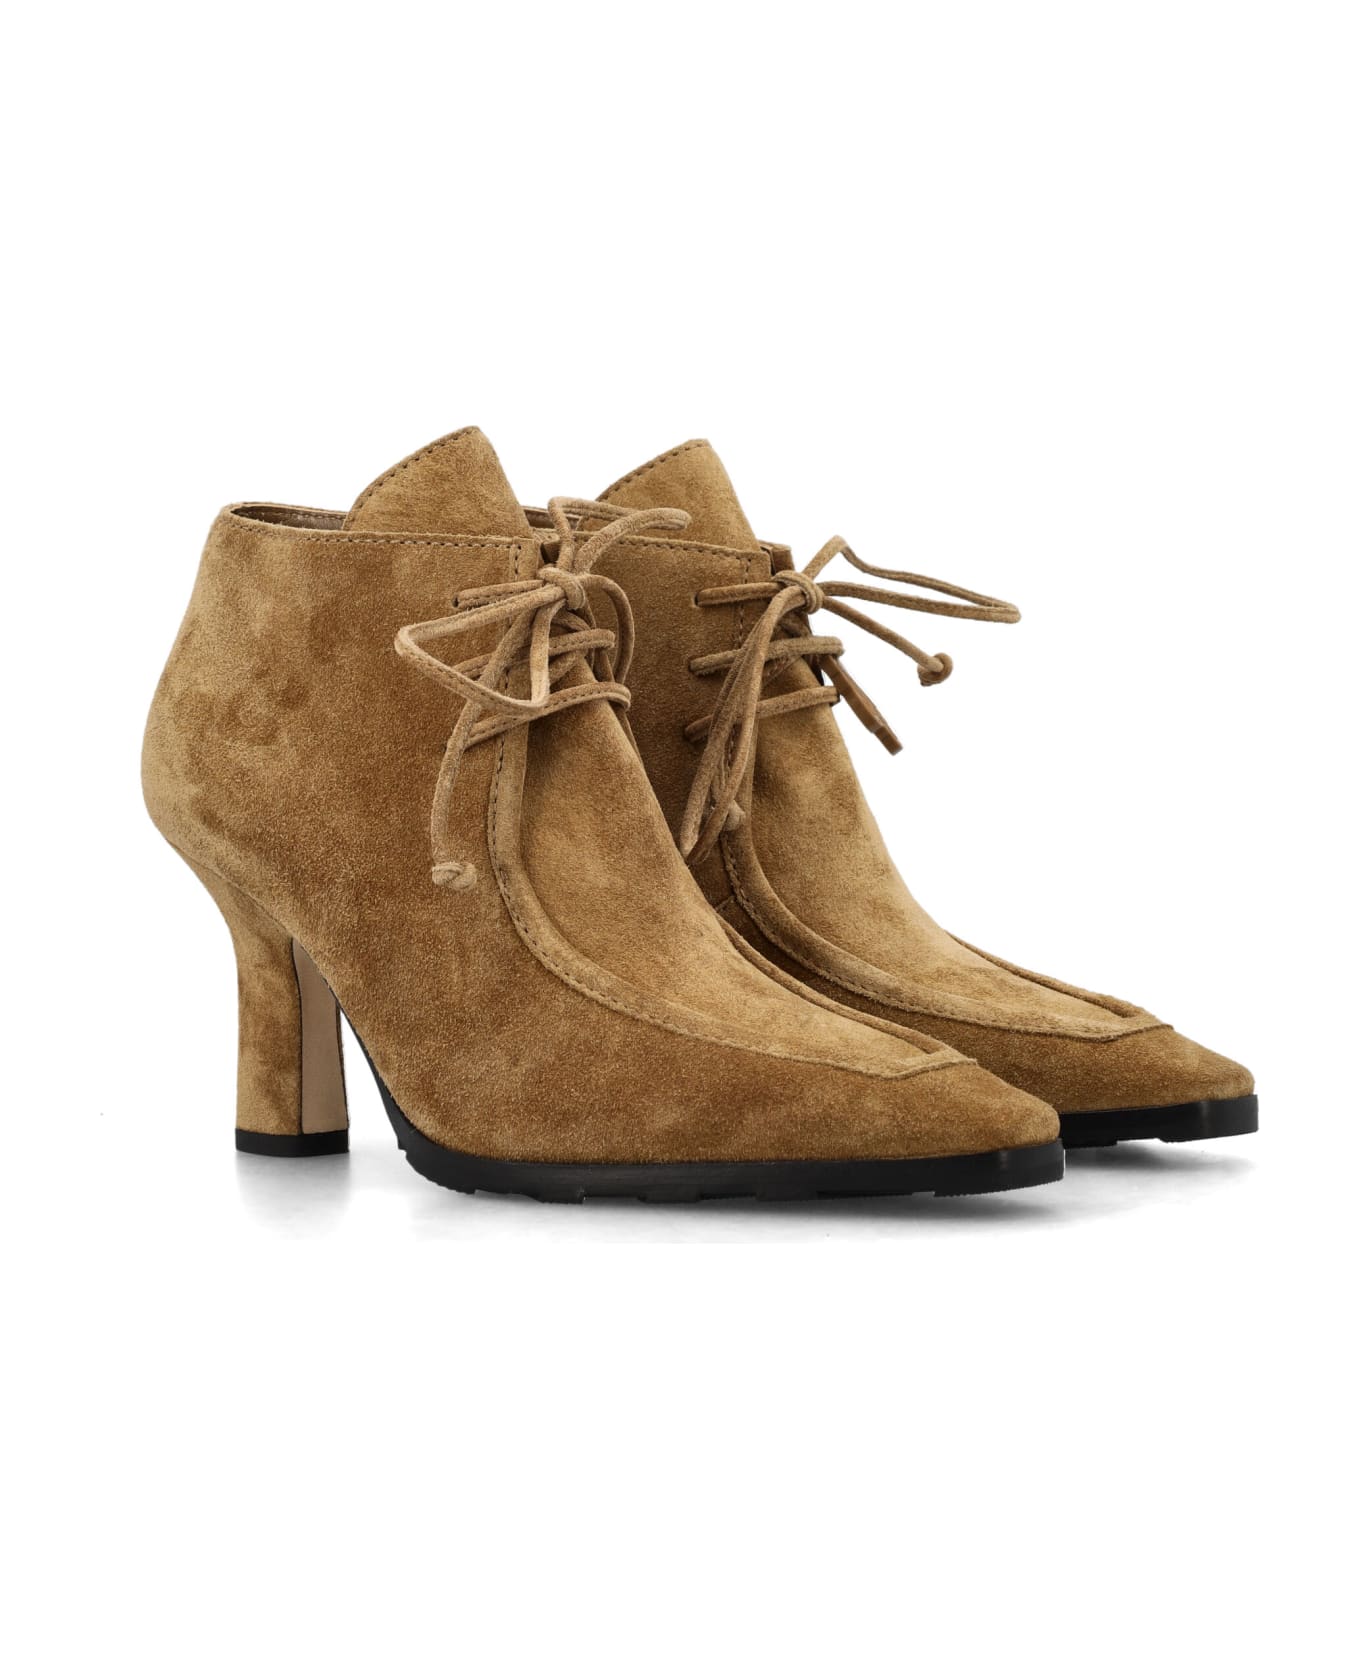 Burberry London Sovereign Suede Lace-up Booties - JUTE